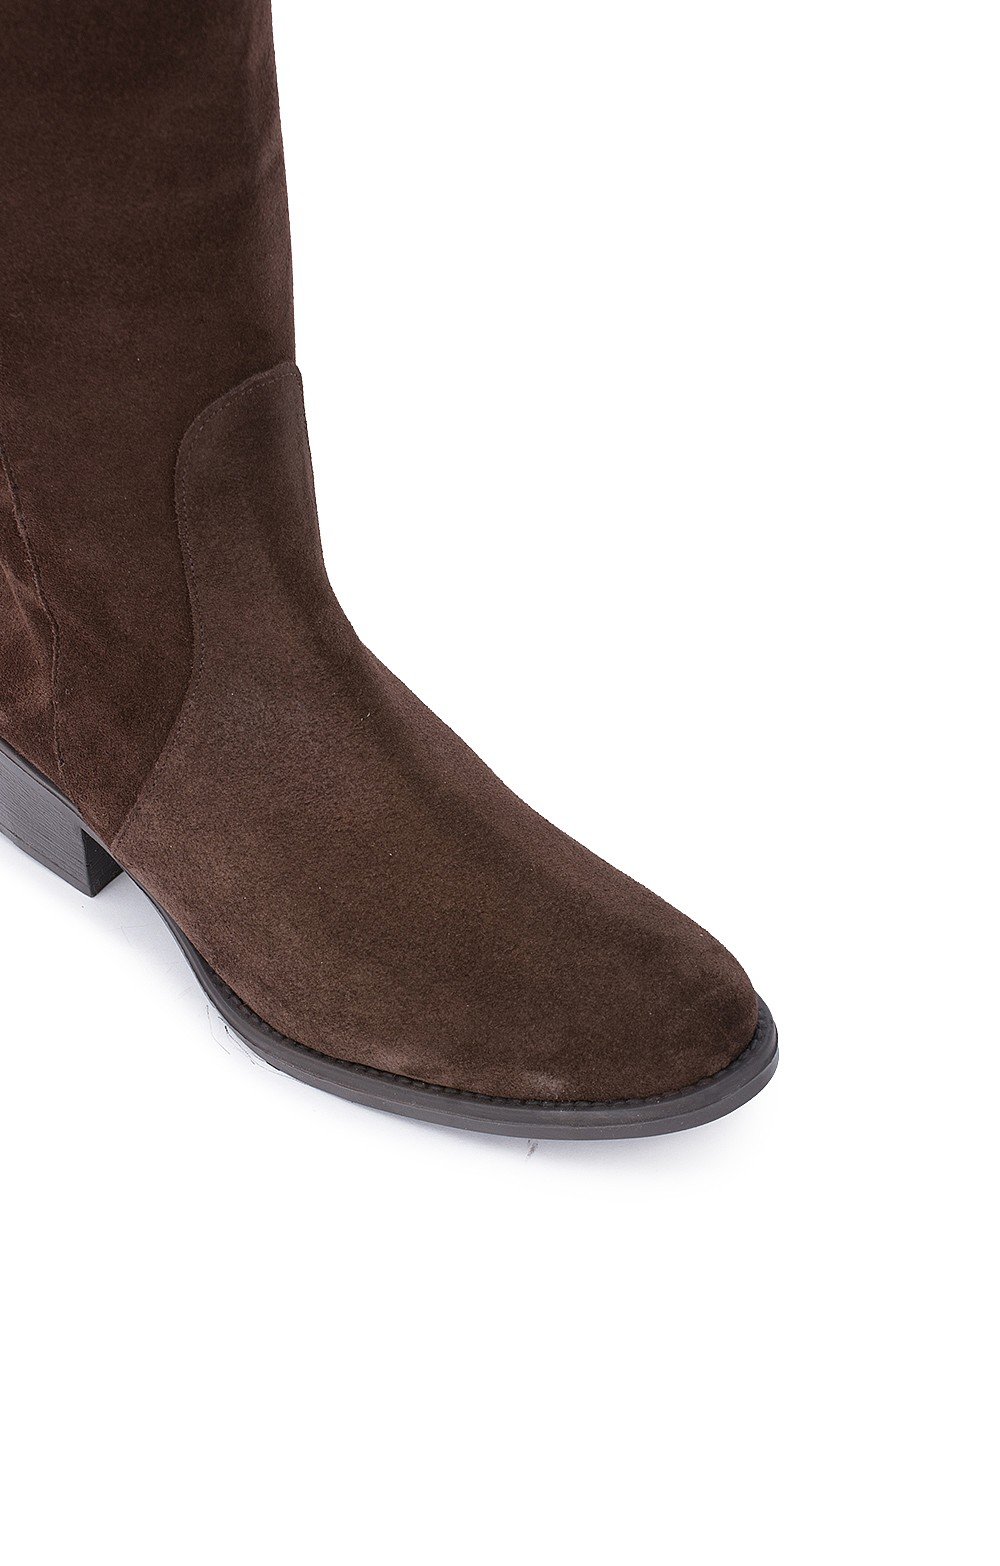 house of bruar suede boots